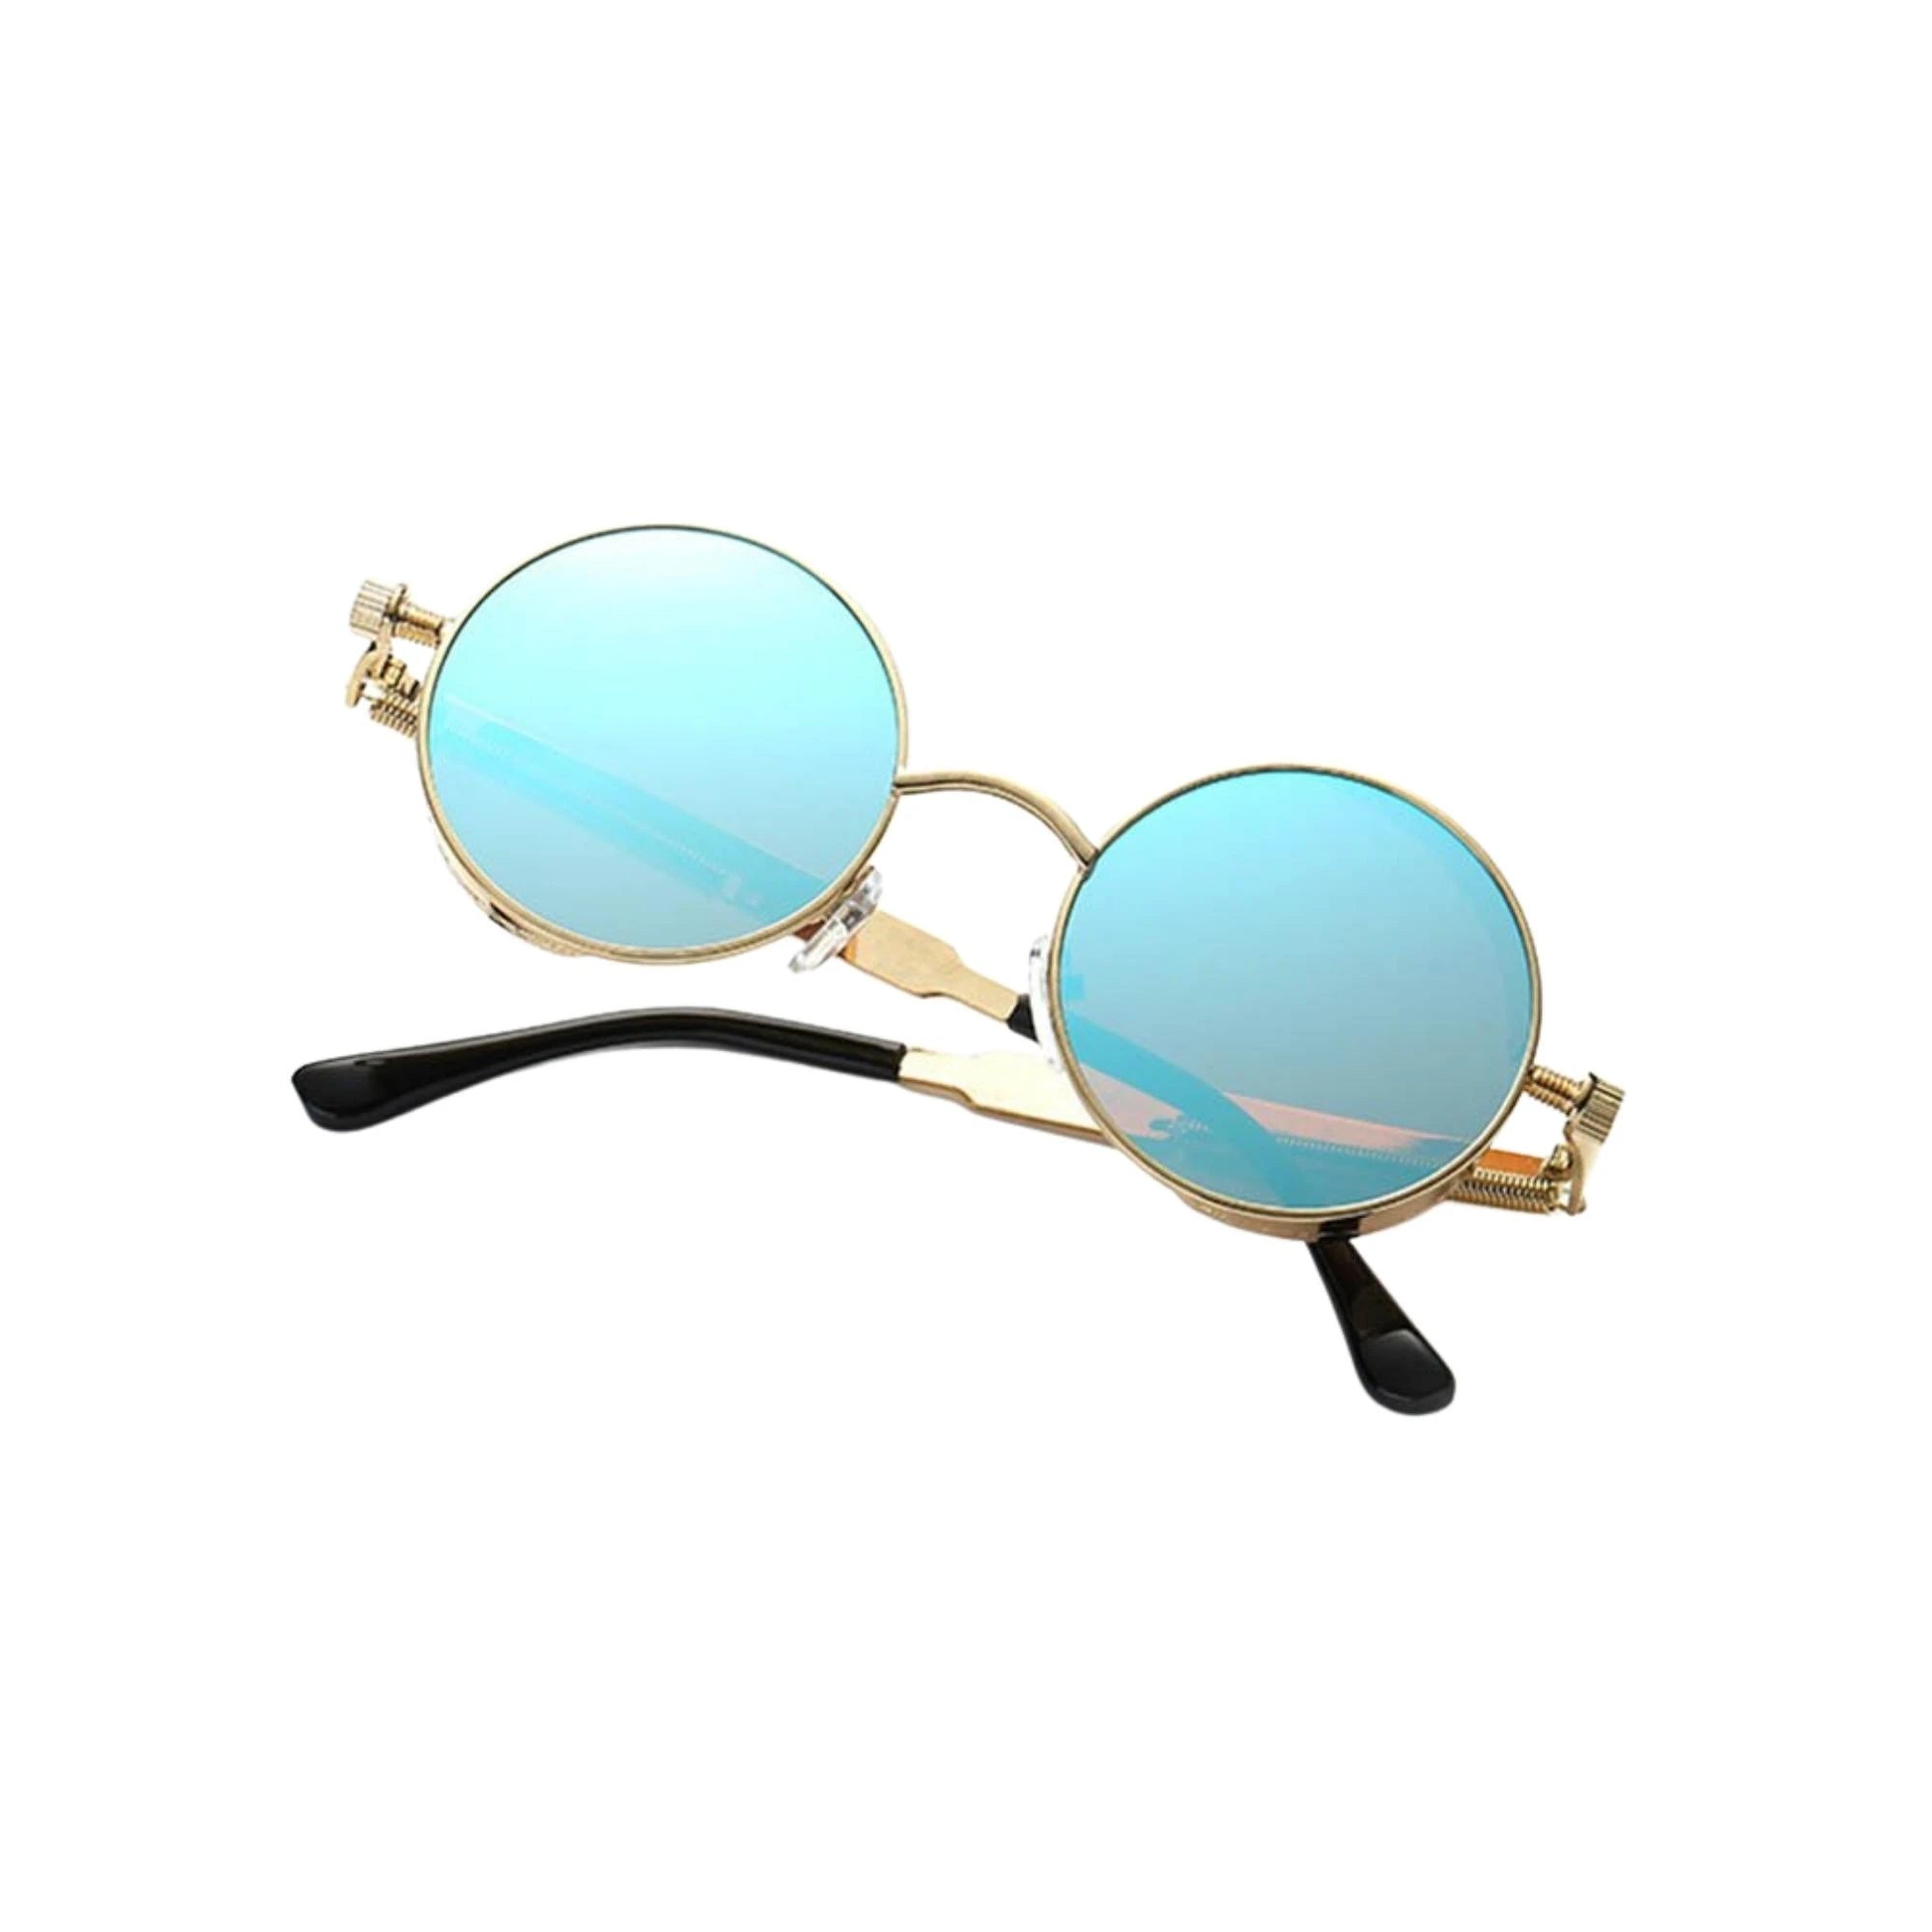 DISC Series Round Steampunk Sunglasses - Gold Frame Blue Mirrored Lens